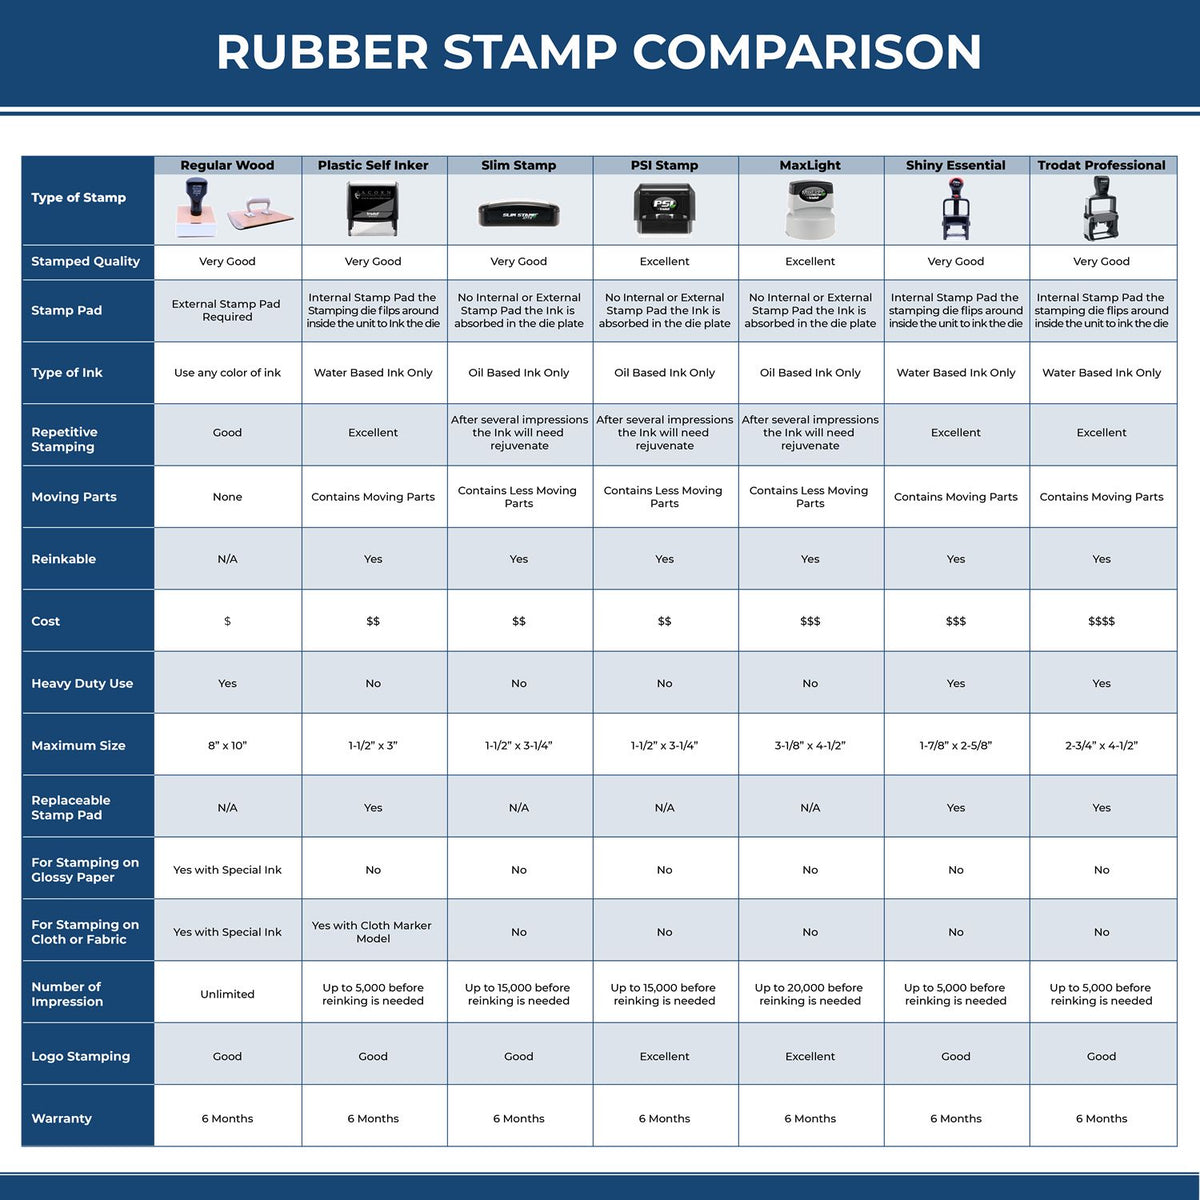 Large Self Inking Late Stamp 4676S Rubber Stamp Comparison